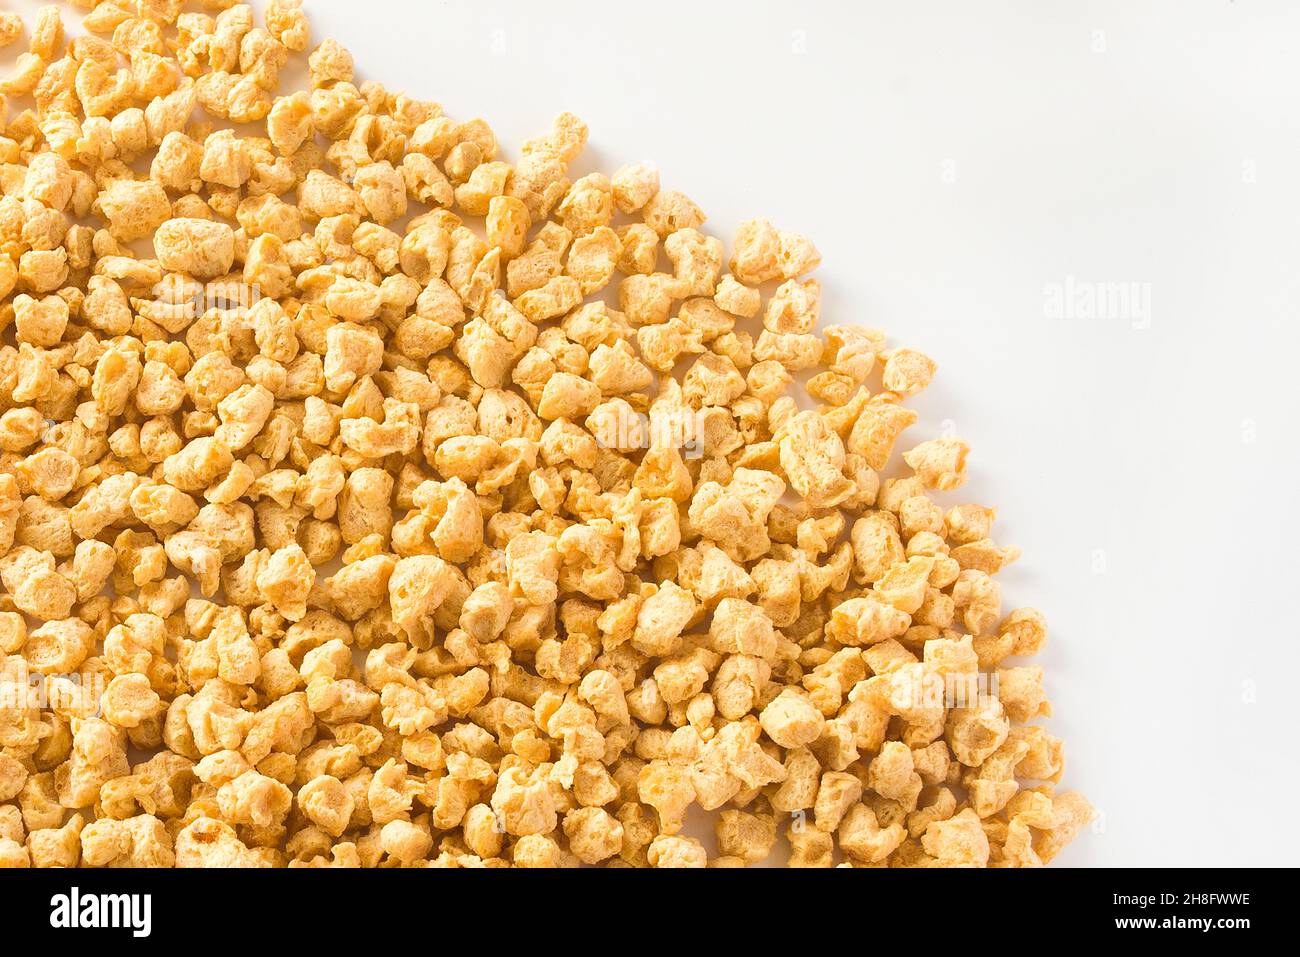 fat grain textured soybeans Stock Photo